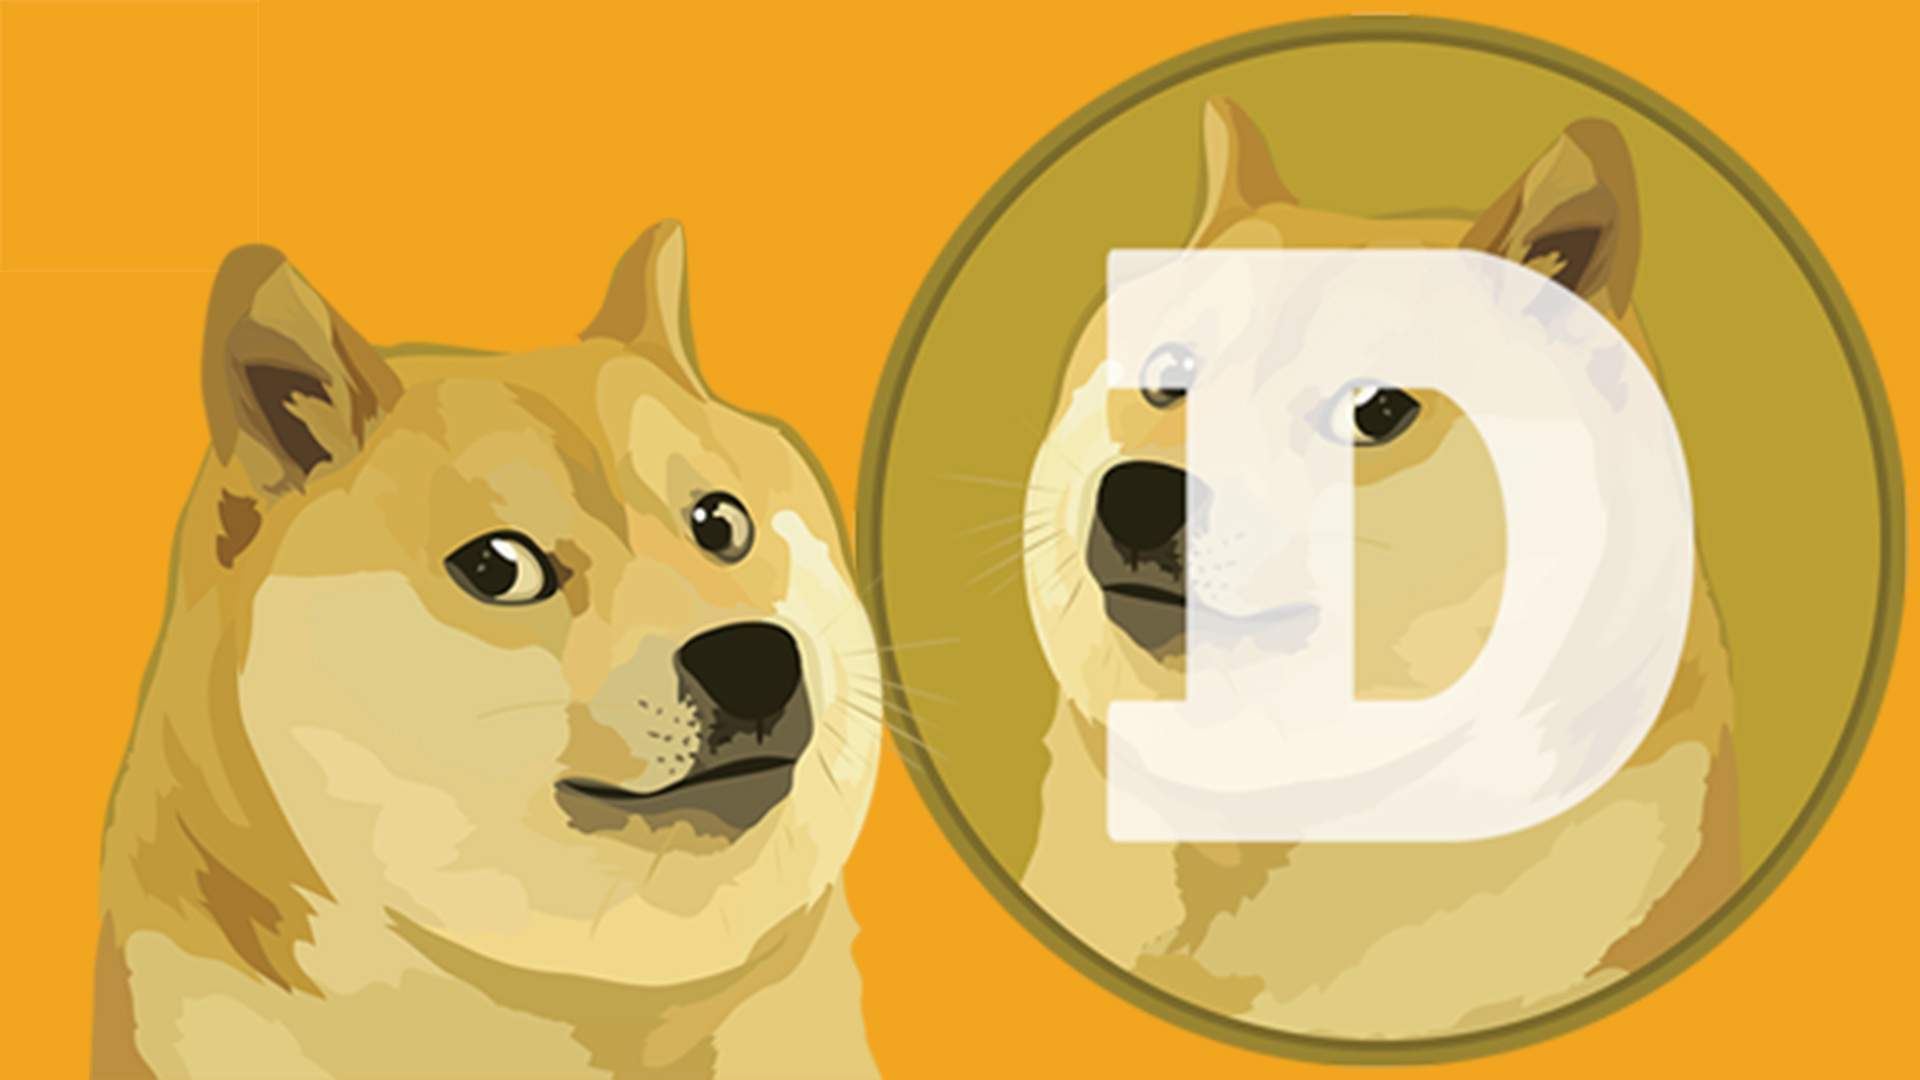 Dogecoin the internet's favorite cryptocurrency